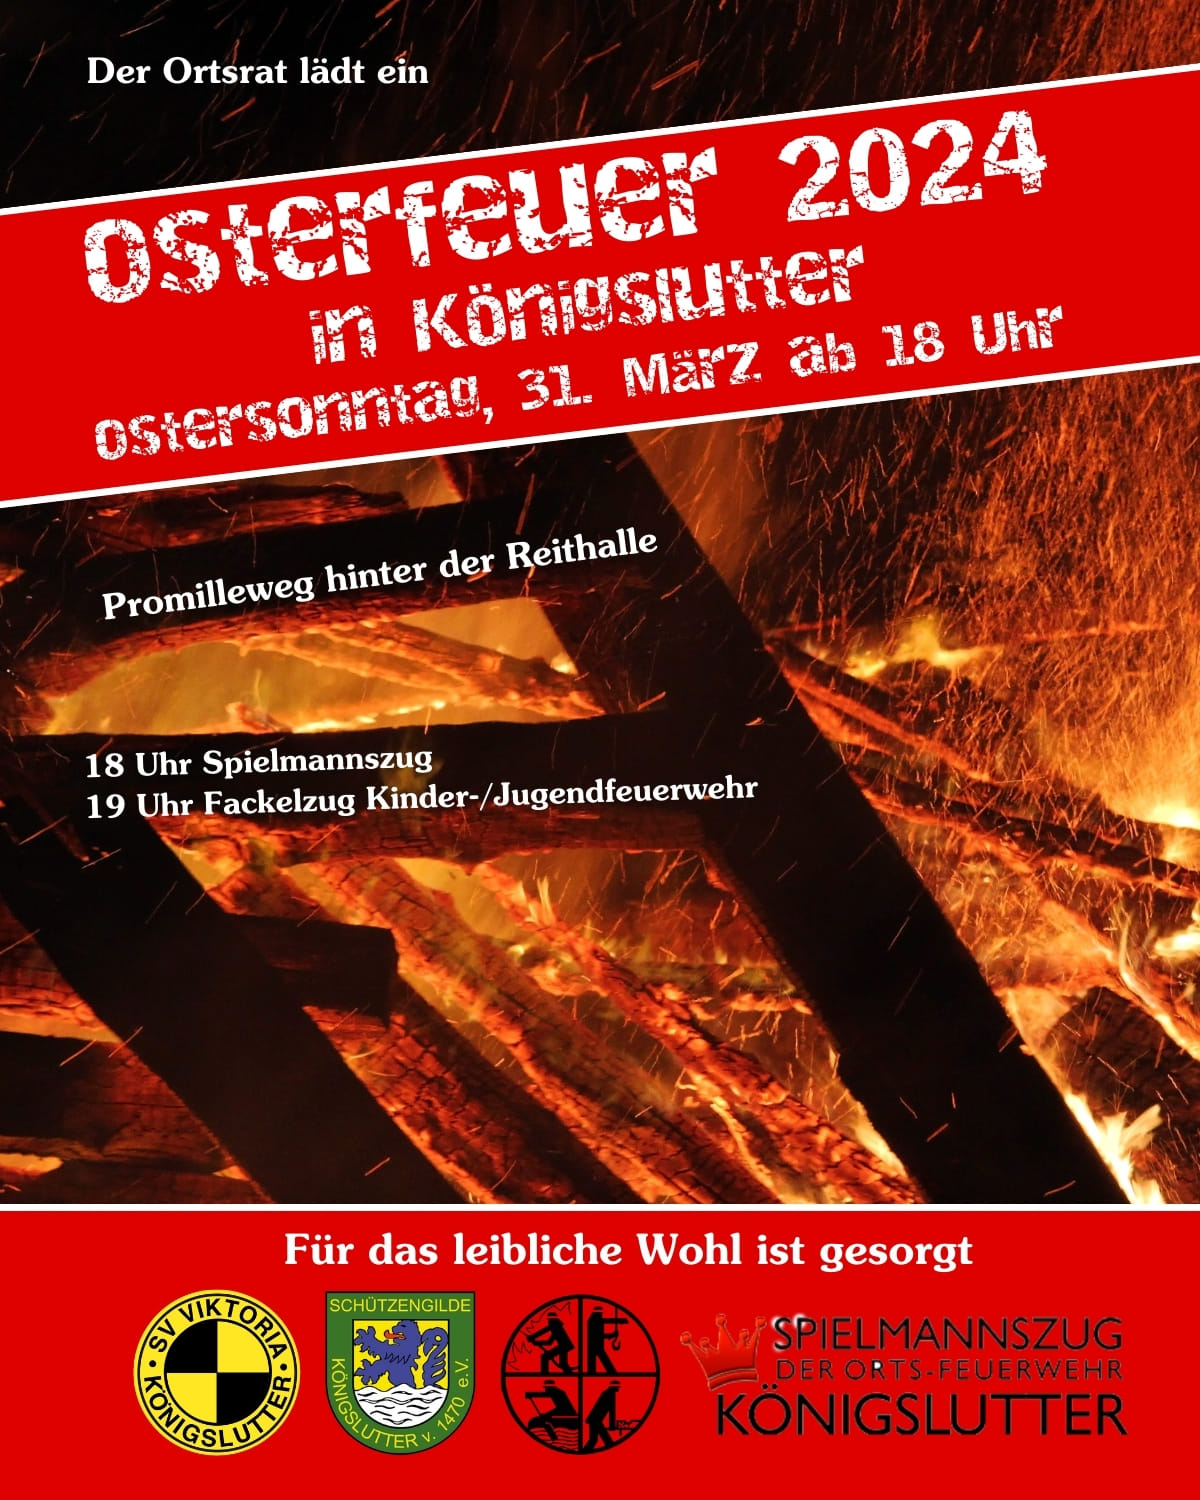 Osterfeuer2024